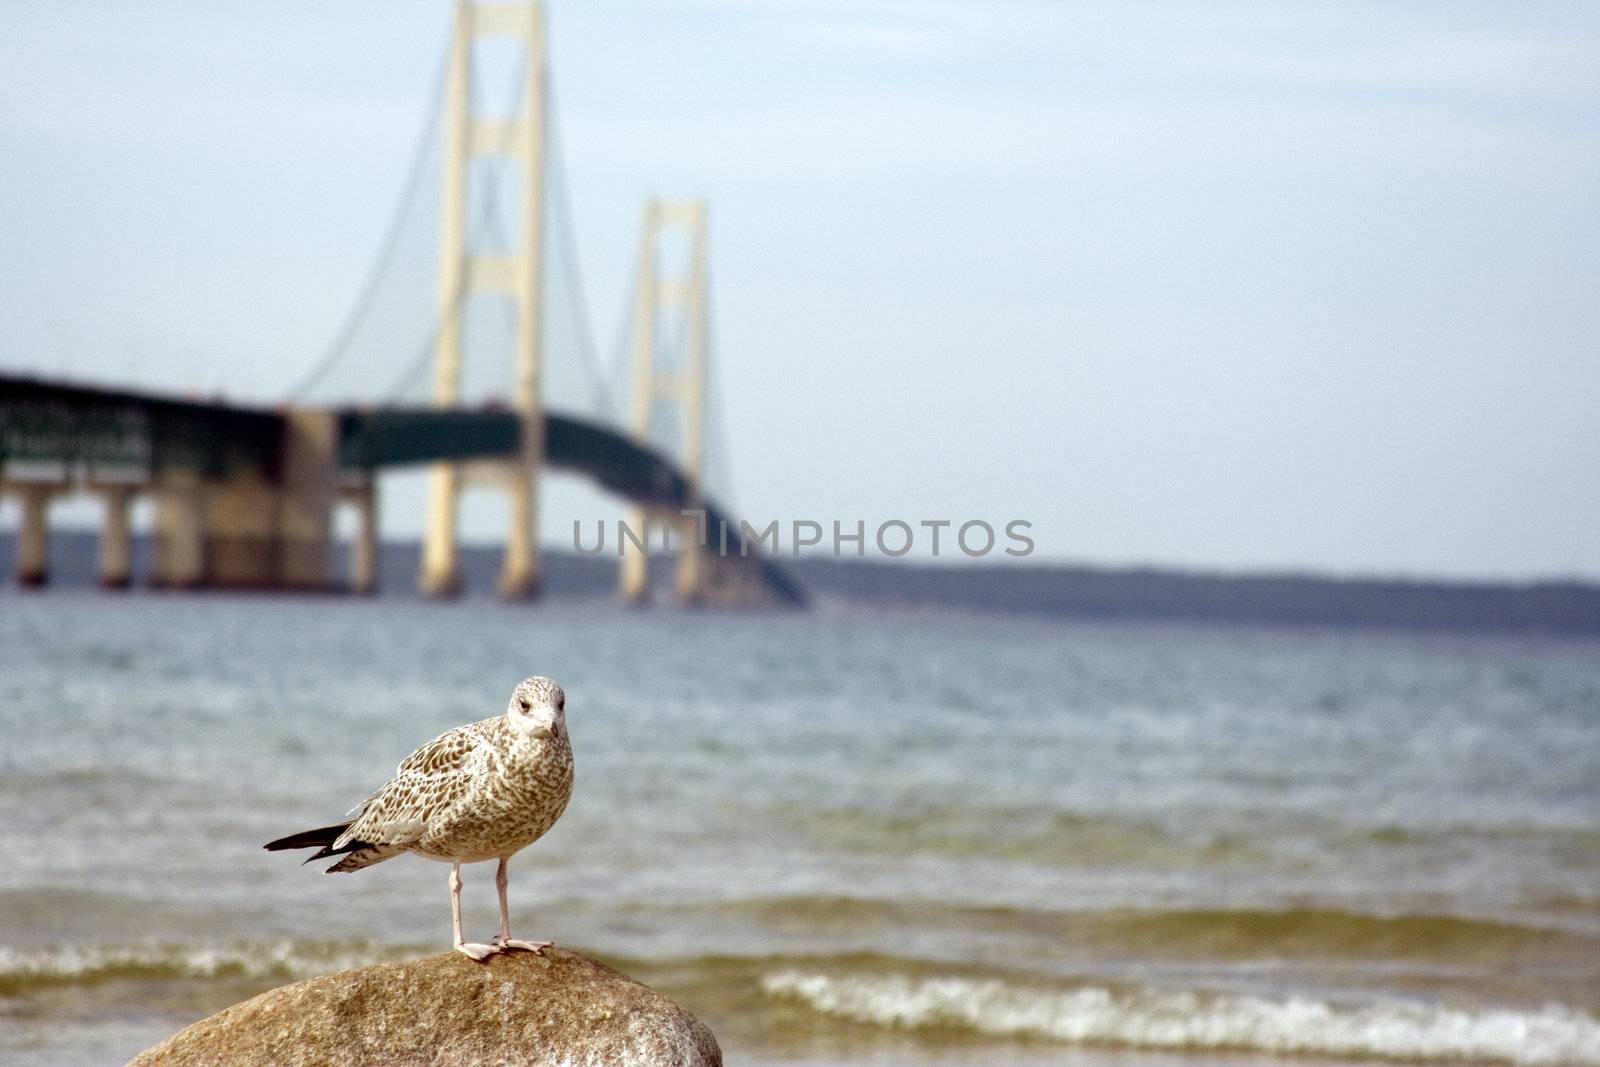 Seagull in front of the machinaw bridge in northern michigan focus on the bird